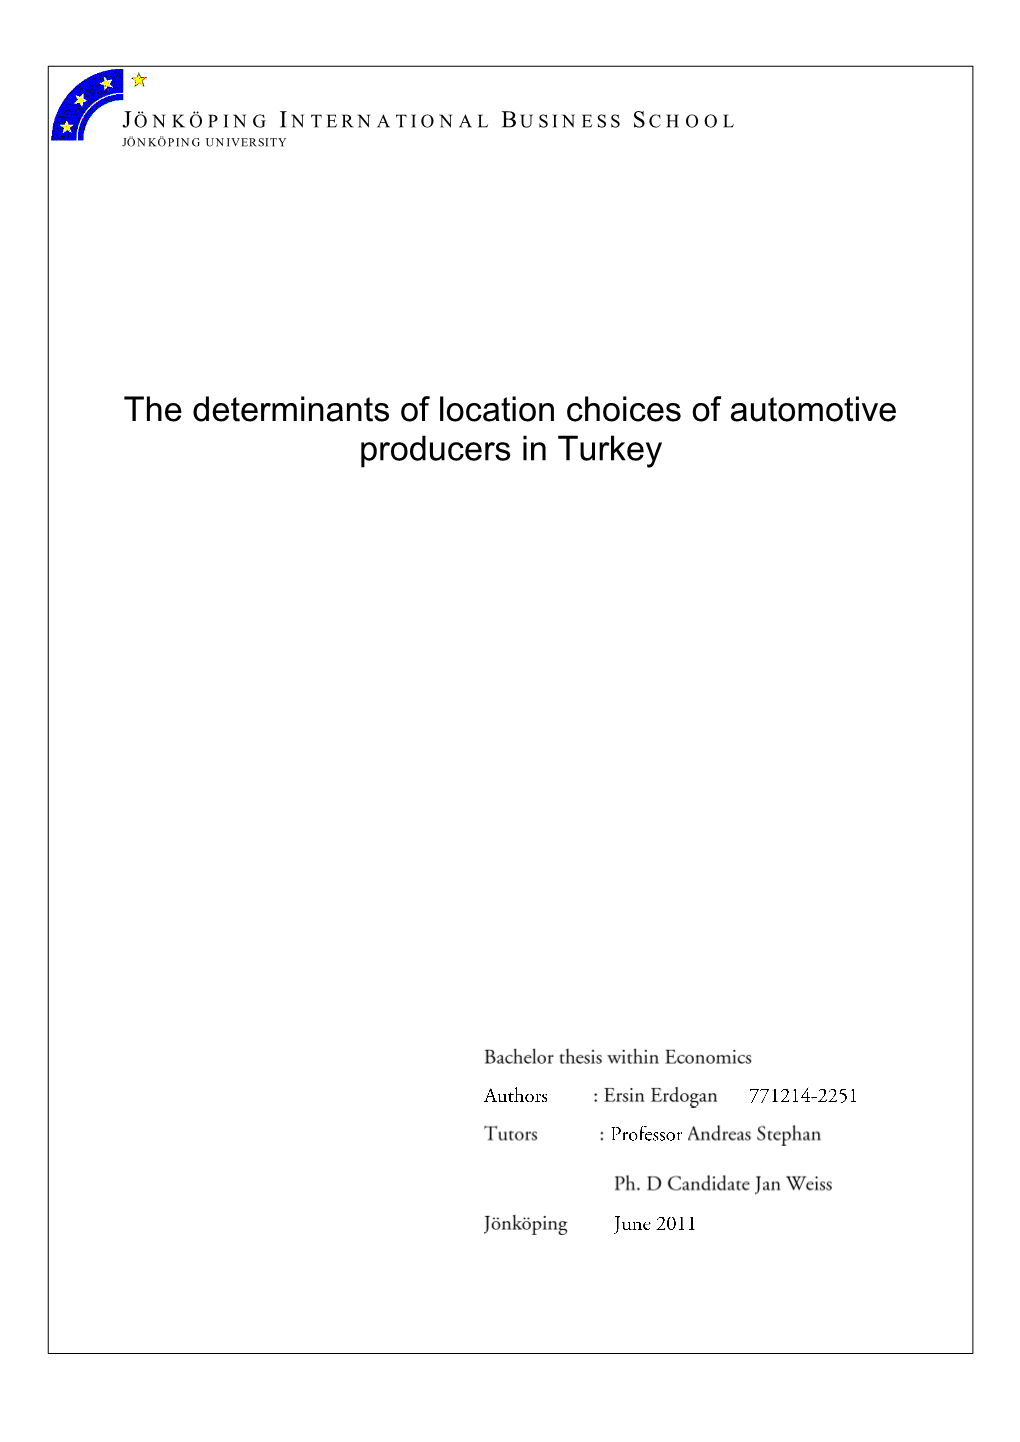 The Determinants of Location Choices of Automotive Producers in Turkey